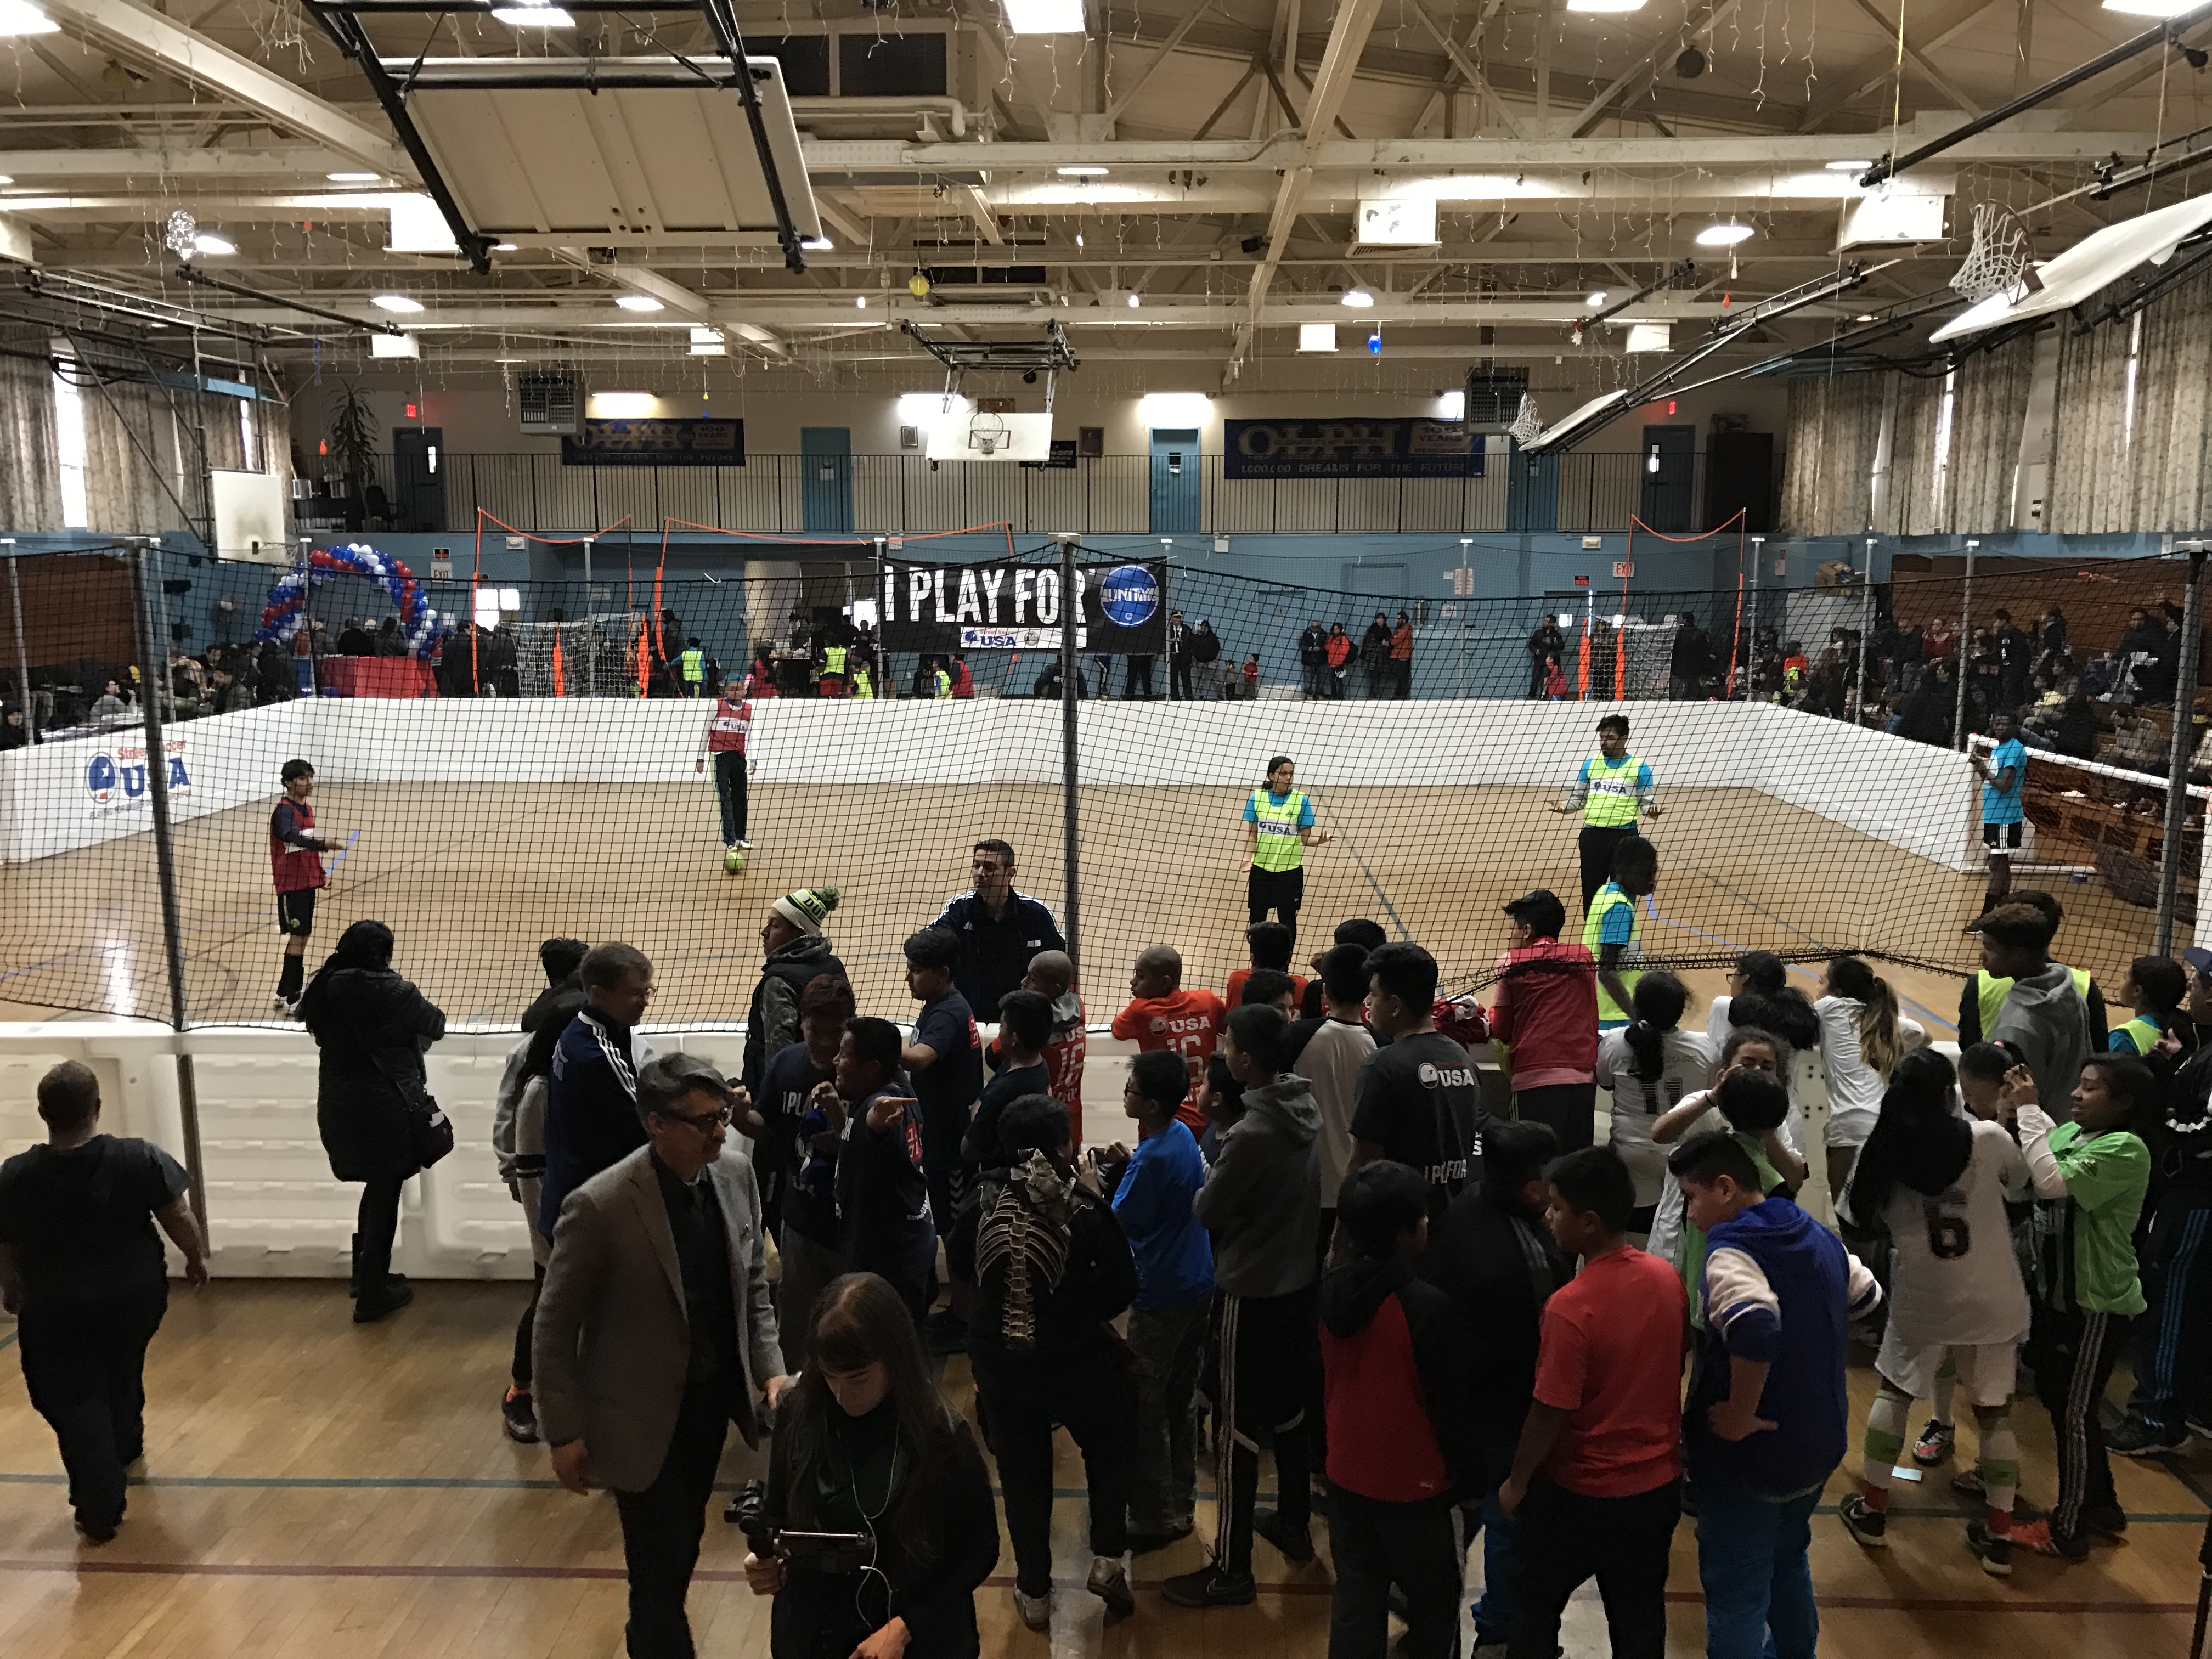 New Street Soccer USA Park To Open In The City Of Escondido